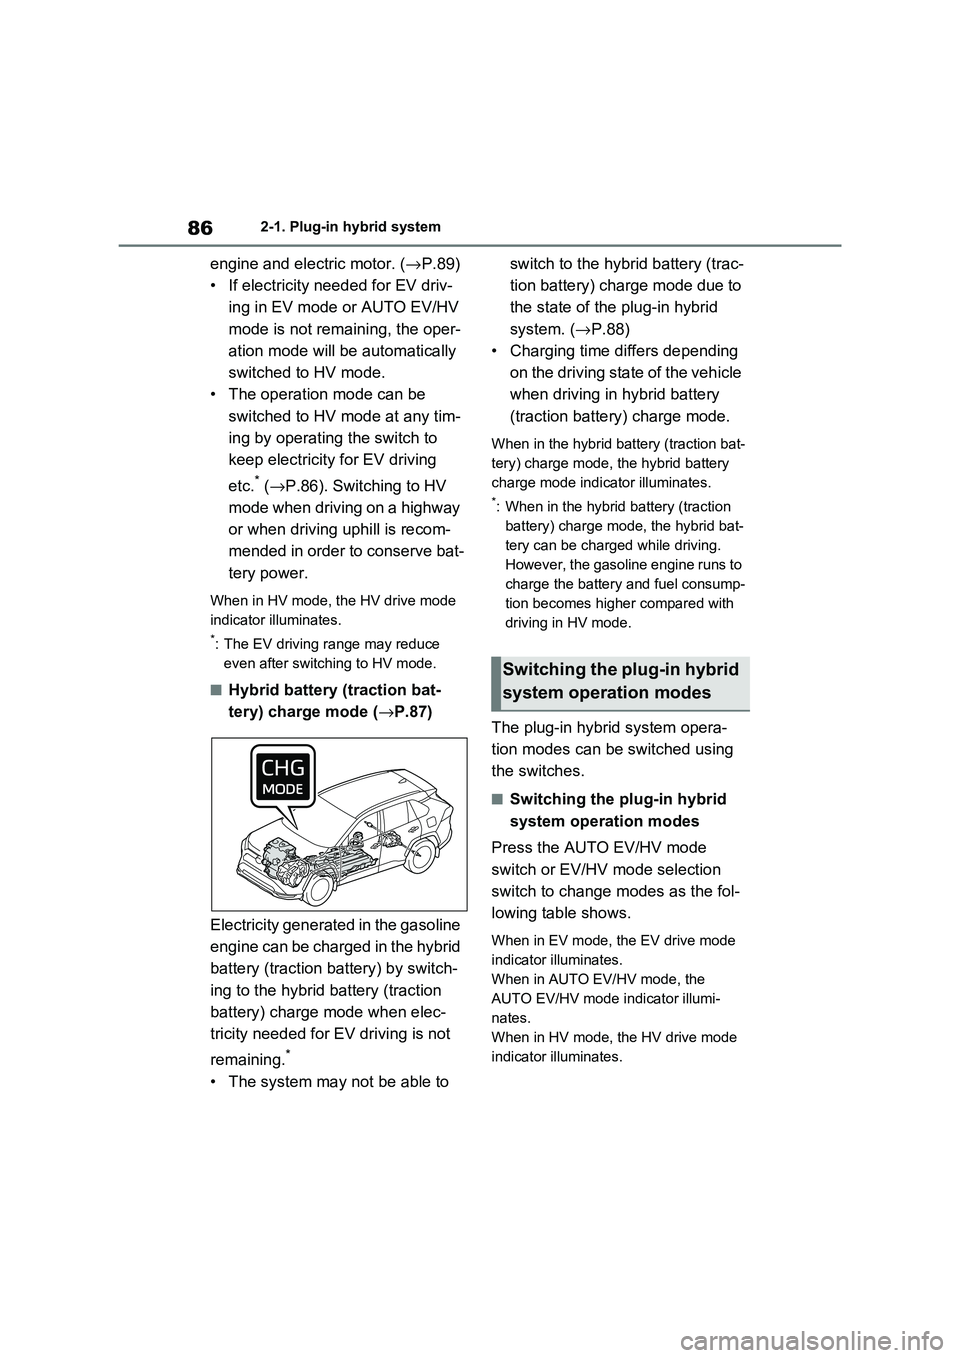 TOYOTA RAV4 PLUG-IN HYBRID 2021  Owners Manual 862-1. Plug-in hybrid system
engine and electric motor. (→P.89) 
• If electricity needed for EV driv - 
ing in EV mode or AUTO EV/HV 
mode is not remaining, the oper - 
ation mode will  be automat